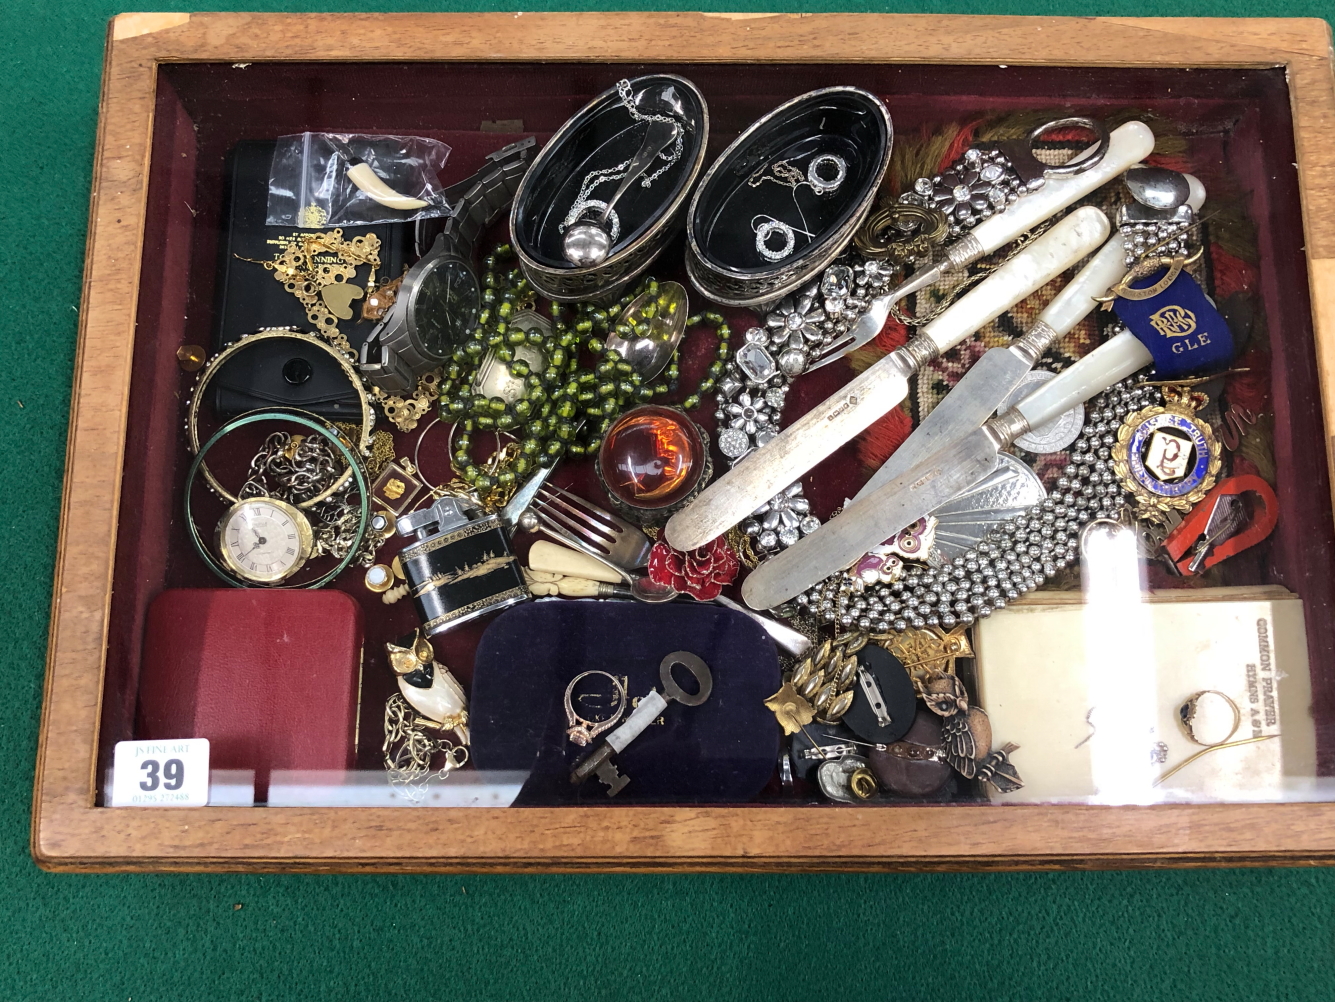 A TABLE TOP JEWELLERY CASE AND CONTENTS TO INCLUDE A 9ct GOLD RING 1.66G, VARIOUS SILVER COSTUME